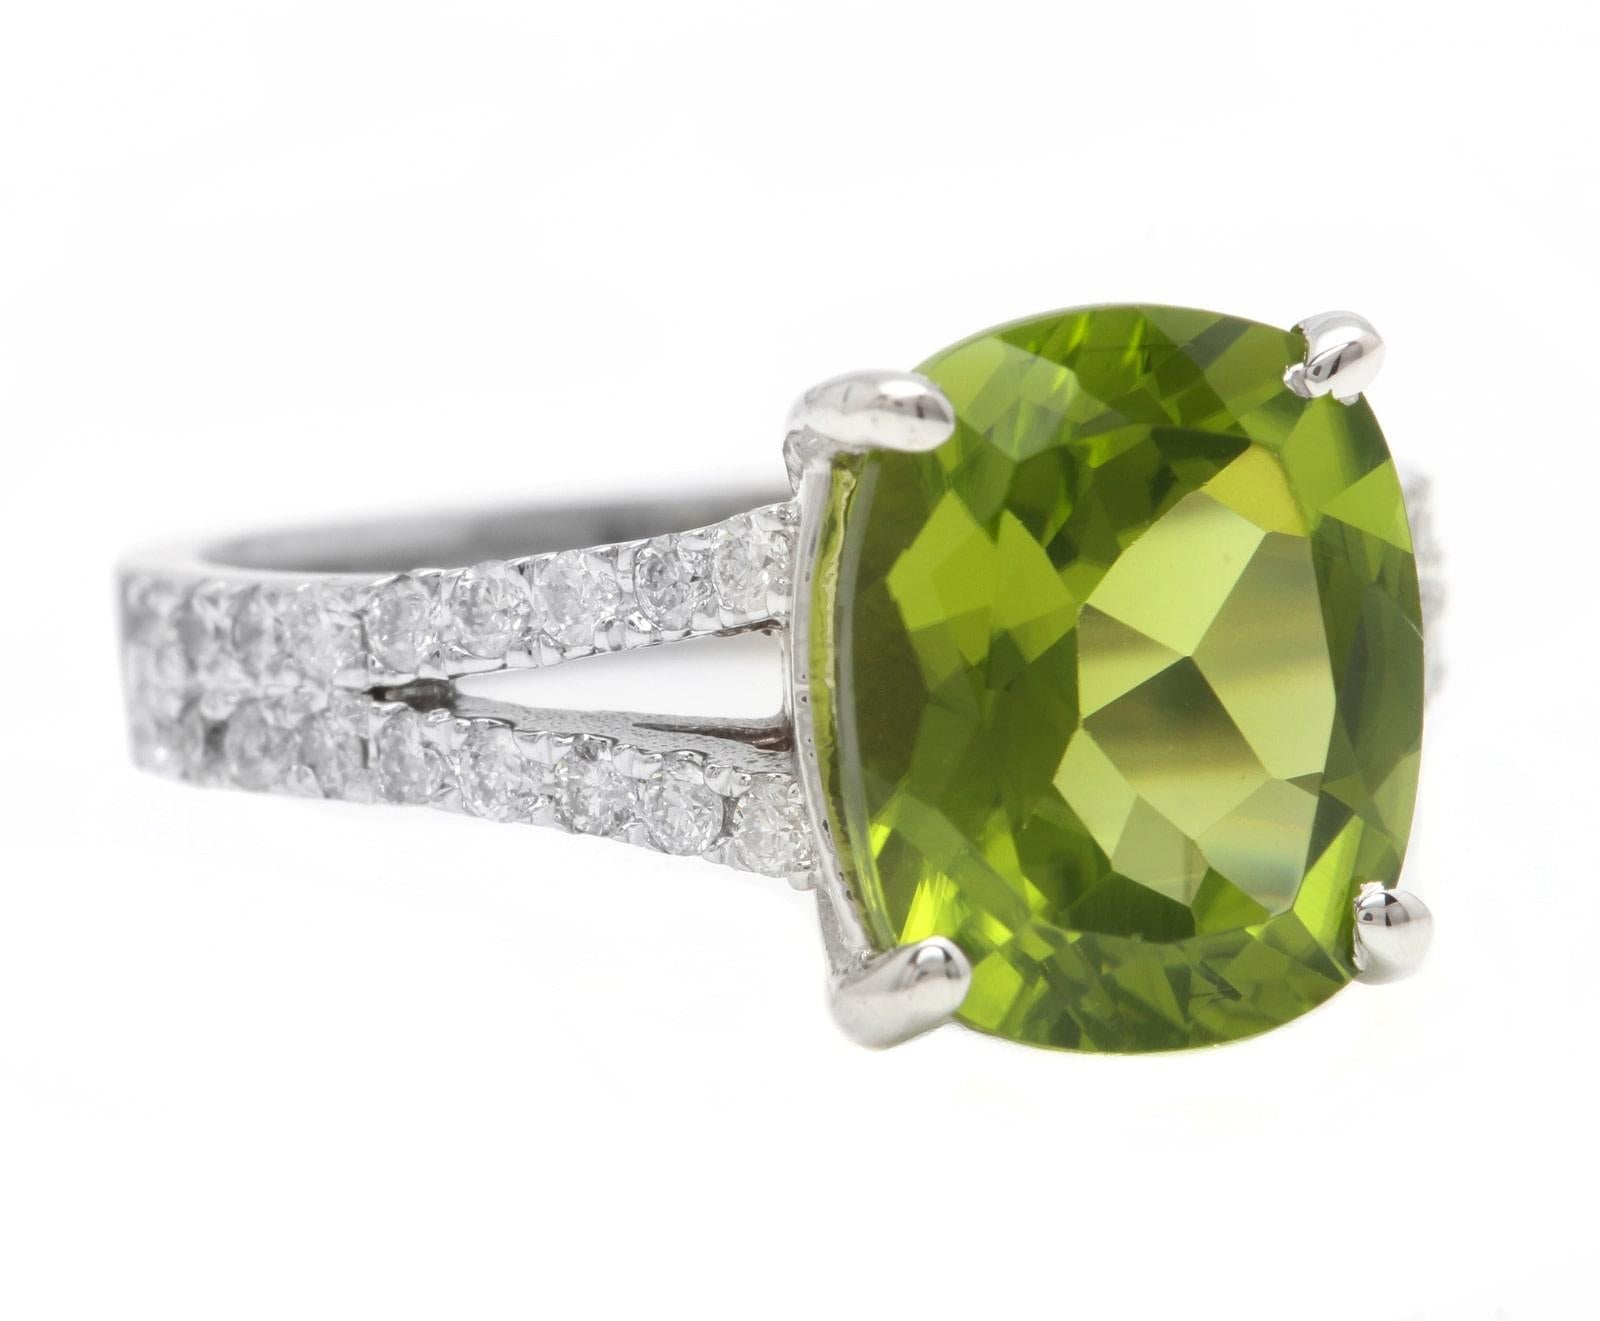 5.00 Carats Natural Very Nice Looking Peridot and Diamond 14K Solid White Gold Ring

Suggested Replacement Value:  $5,000.00

Total Natural Cushion Peridot Weight is: Approx. 4.50 Carats 

Peridot Measures: Approx. 11 x 9mm

Natural Round Diamonds